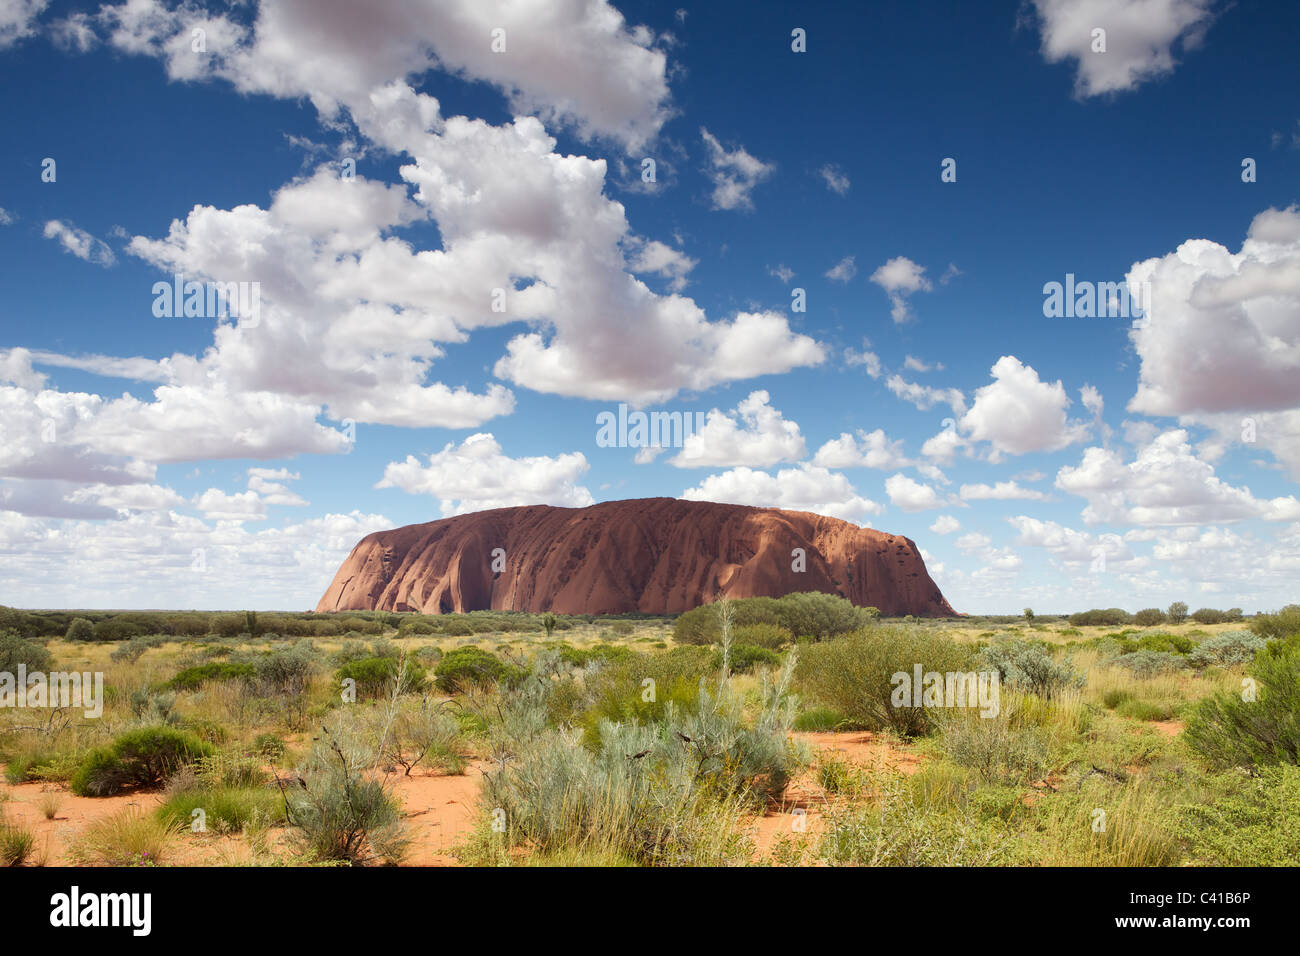 Ayres Rock - Uluru - Red Rock at the heart of the outback Stock Photo